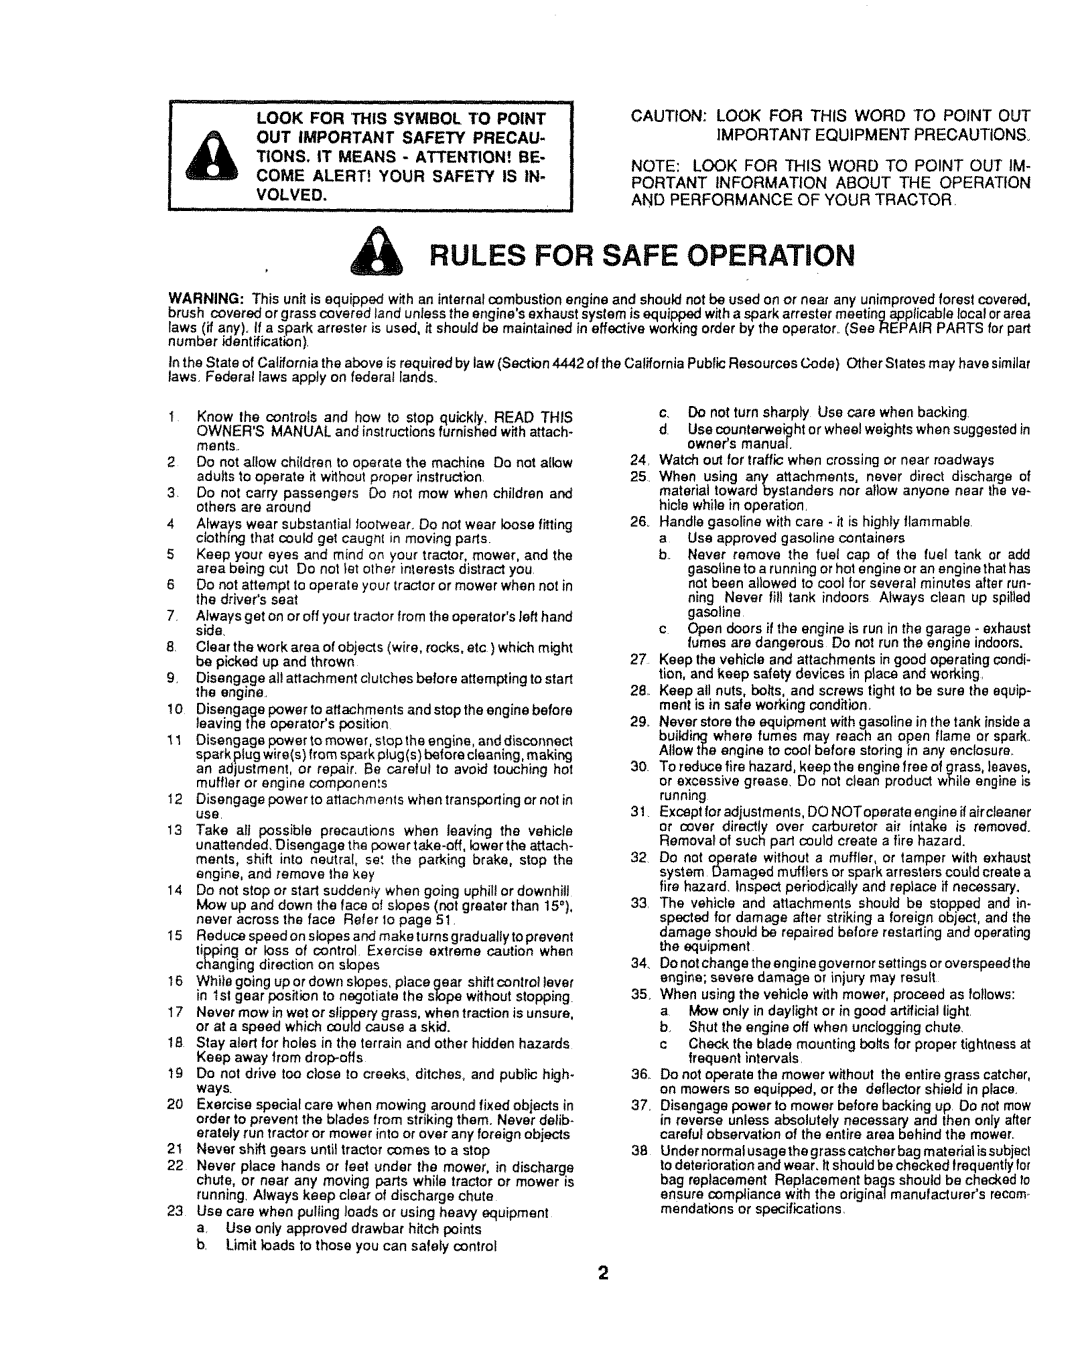 Craftsman 917.254611 Rules For Safe Operation, Caution: Look For This Word To Point Out, Important Equipment Precautions 